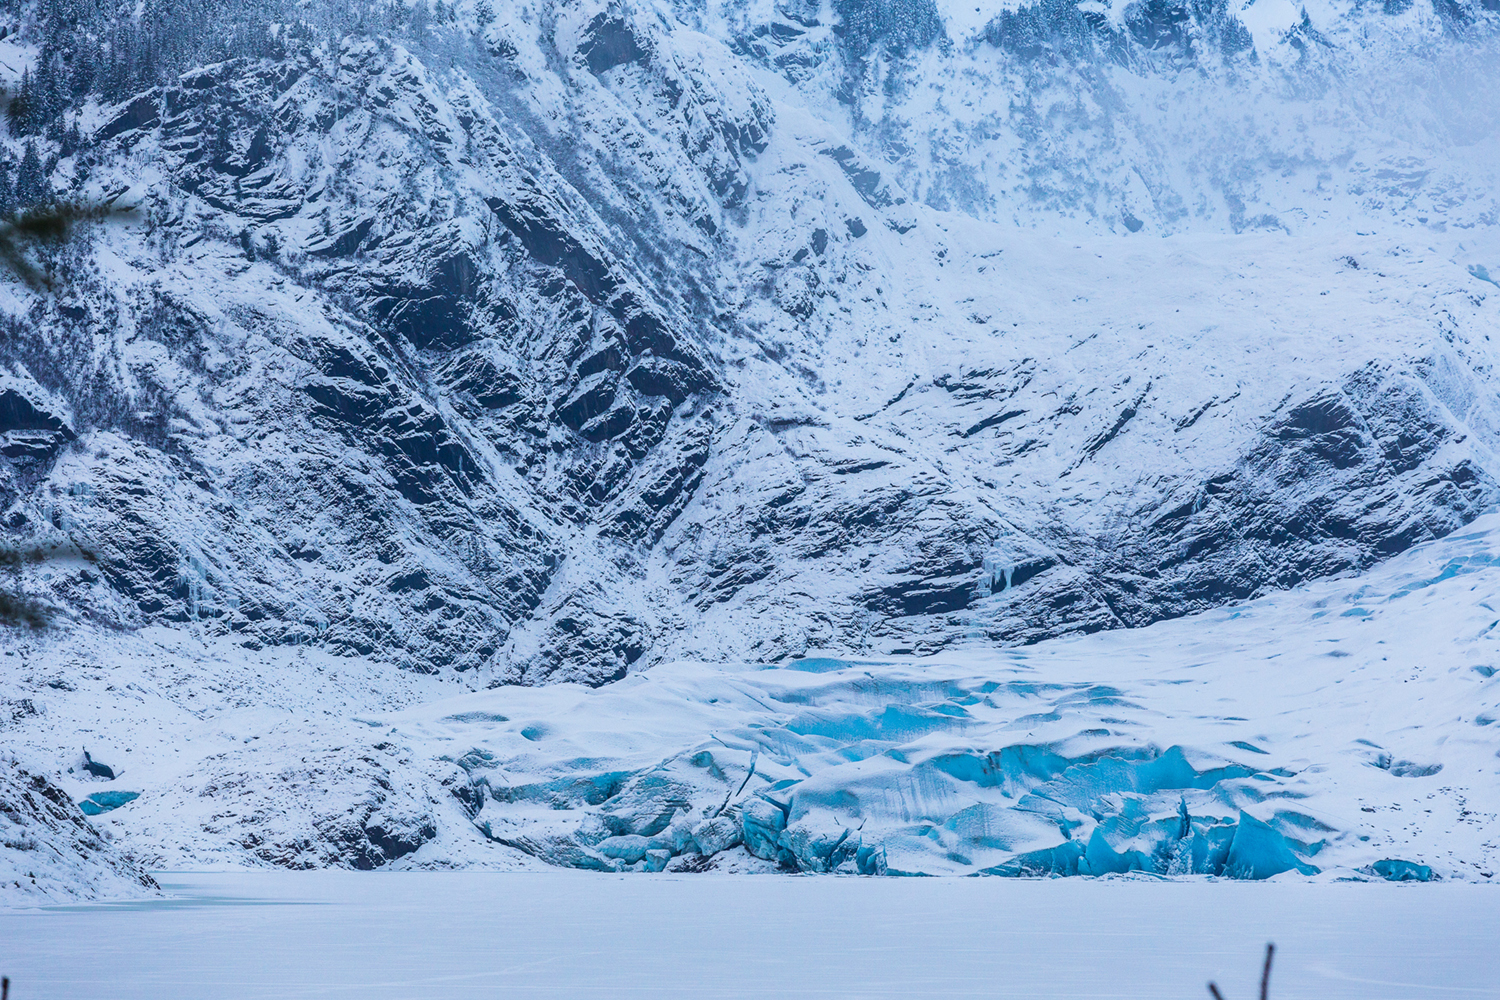 The Mendenhall Glacier is located in Alaska's state capital, Juneau. UAF Photo by JR Ancheta